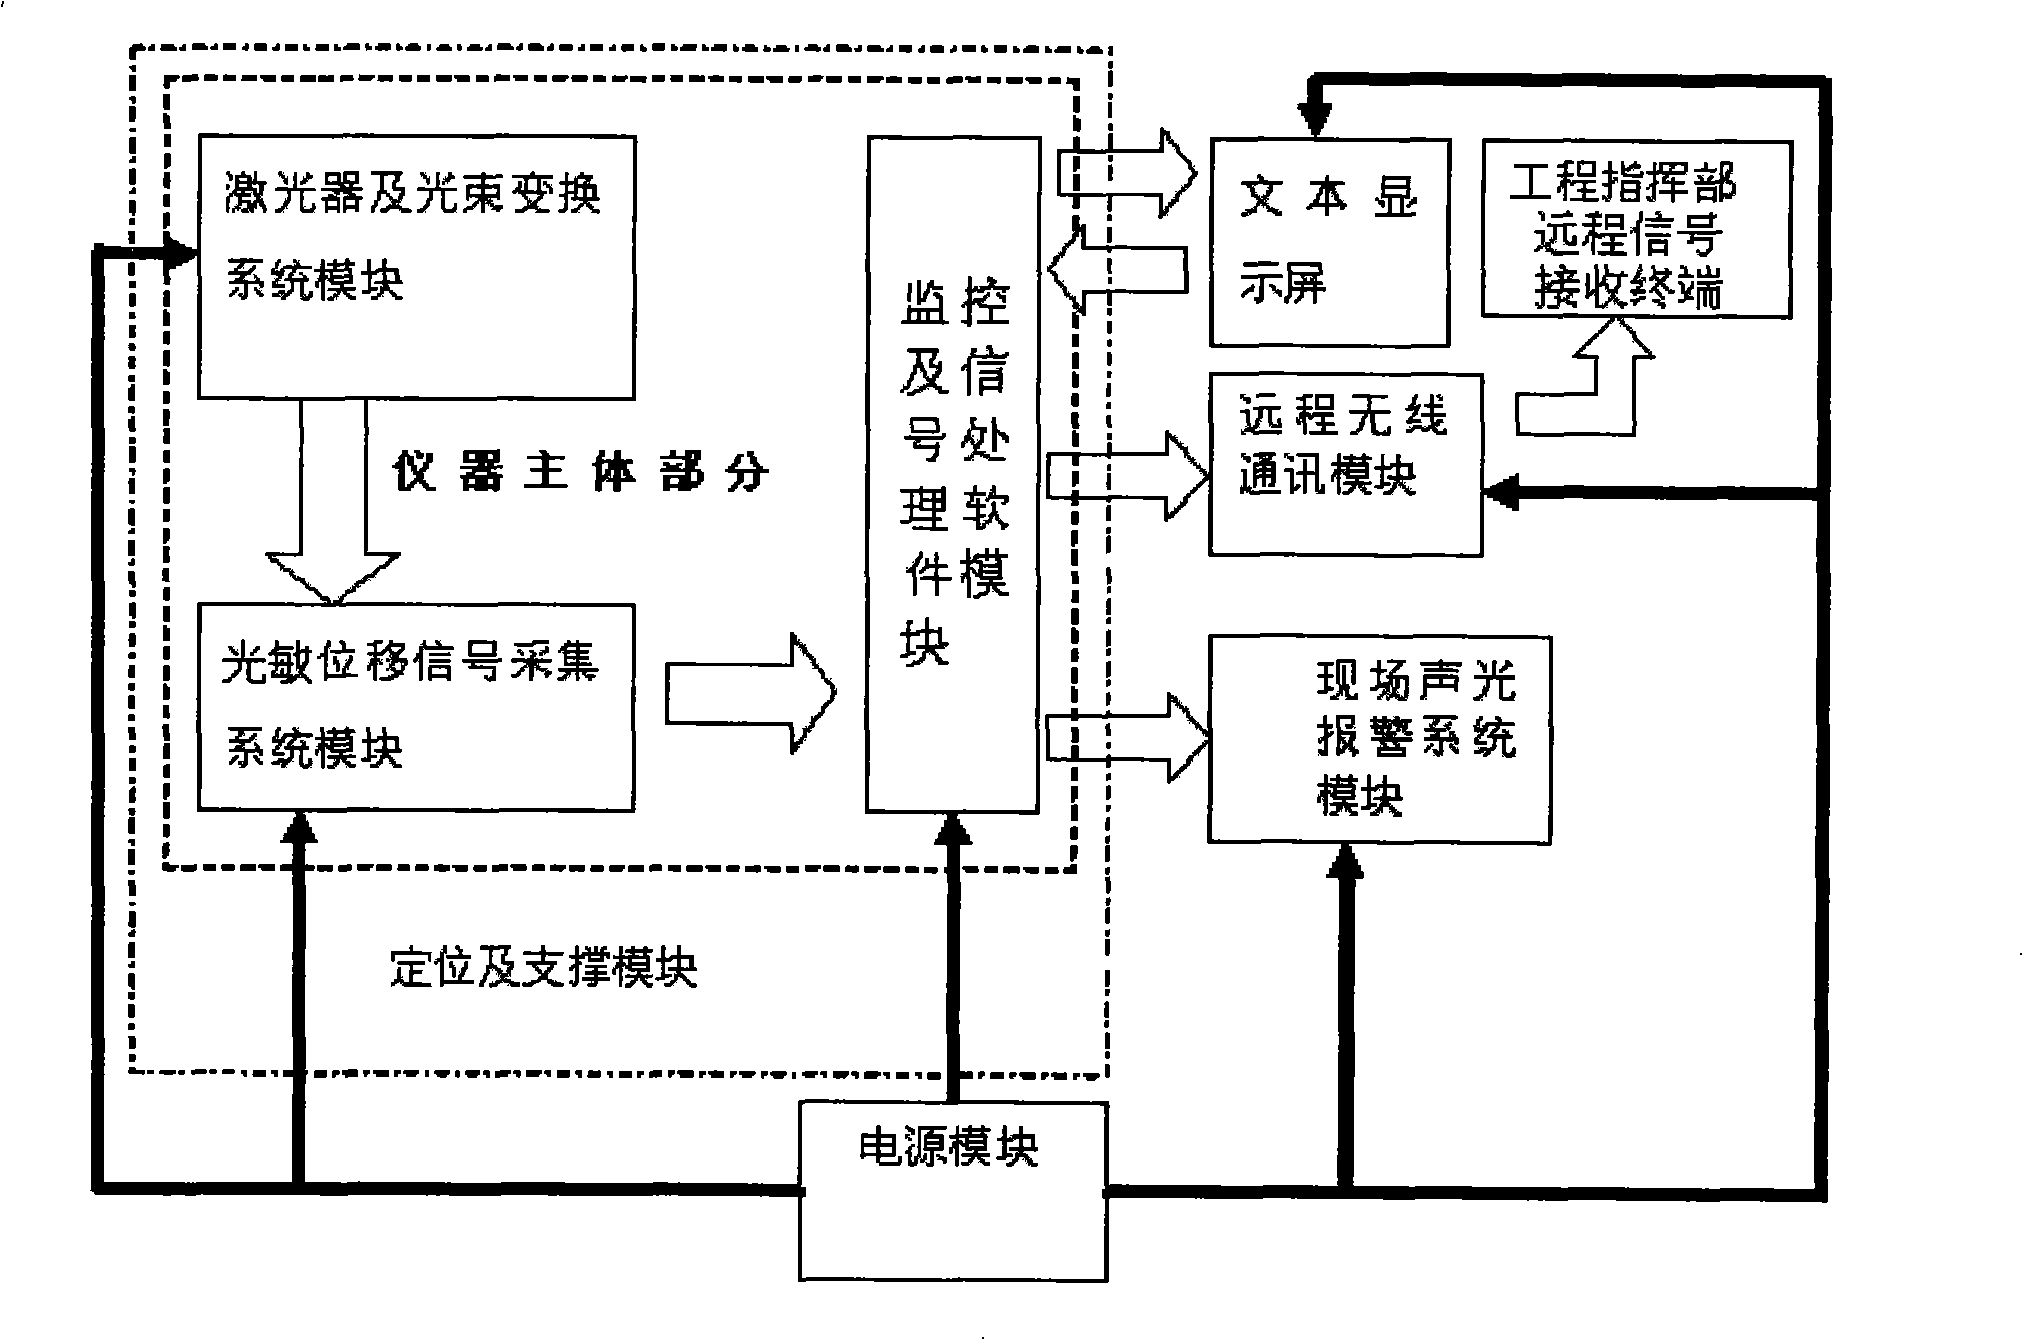 Tunnel wall rock deformation monitoring method and monitoring system thereof